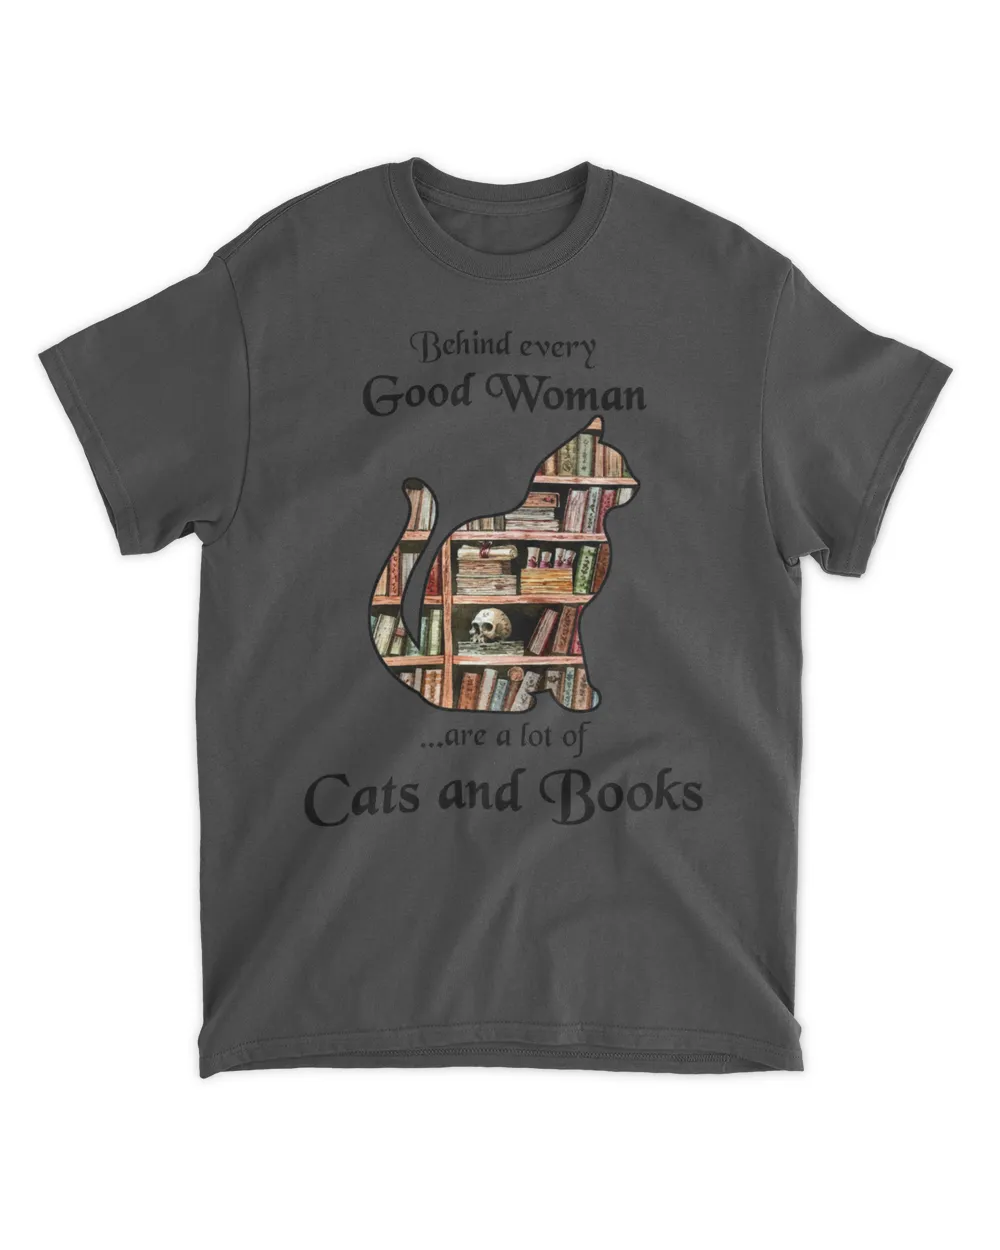 Behind every good woman are a lot of cats and books